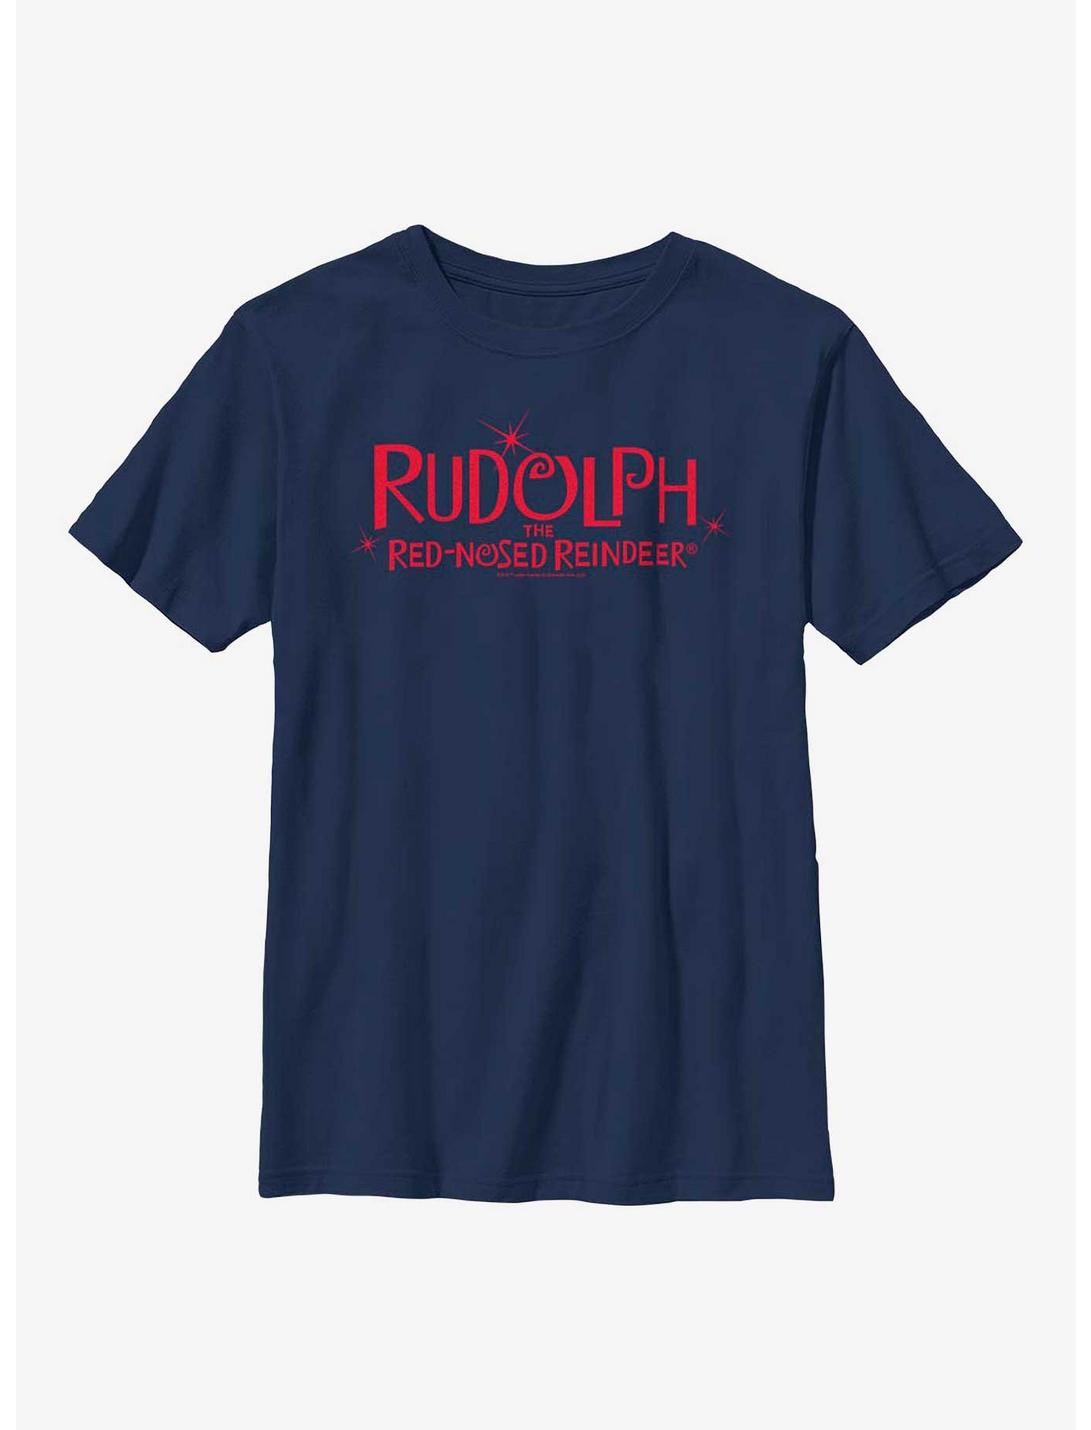 Rudolph The Red-Nosed Reindeer Logo Youth T-Shirt, NAVY, hi-res